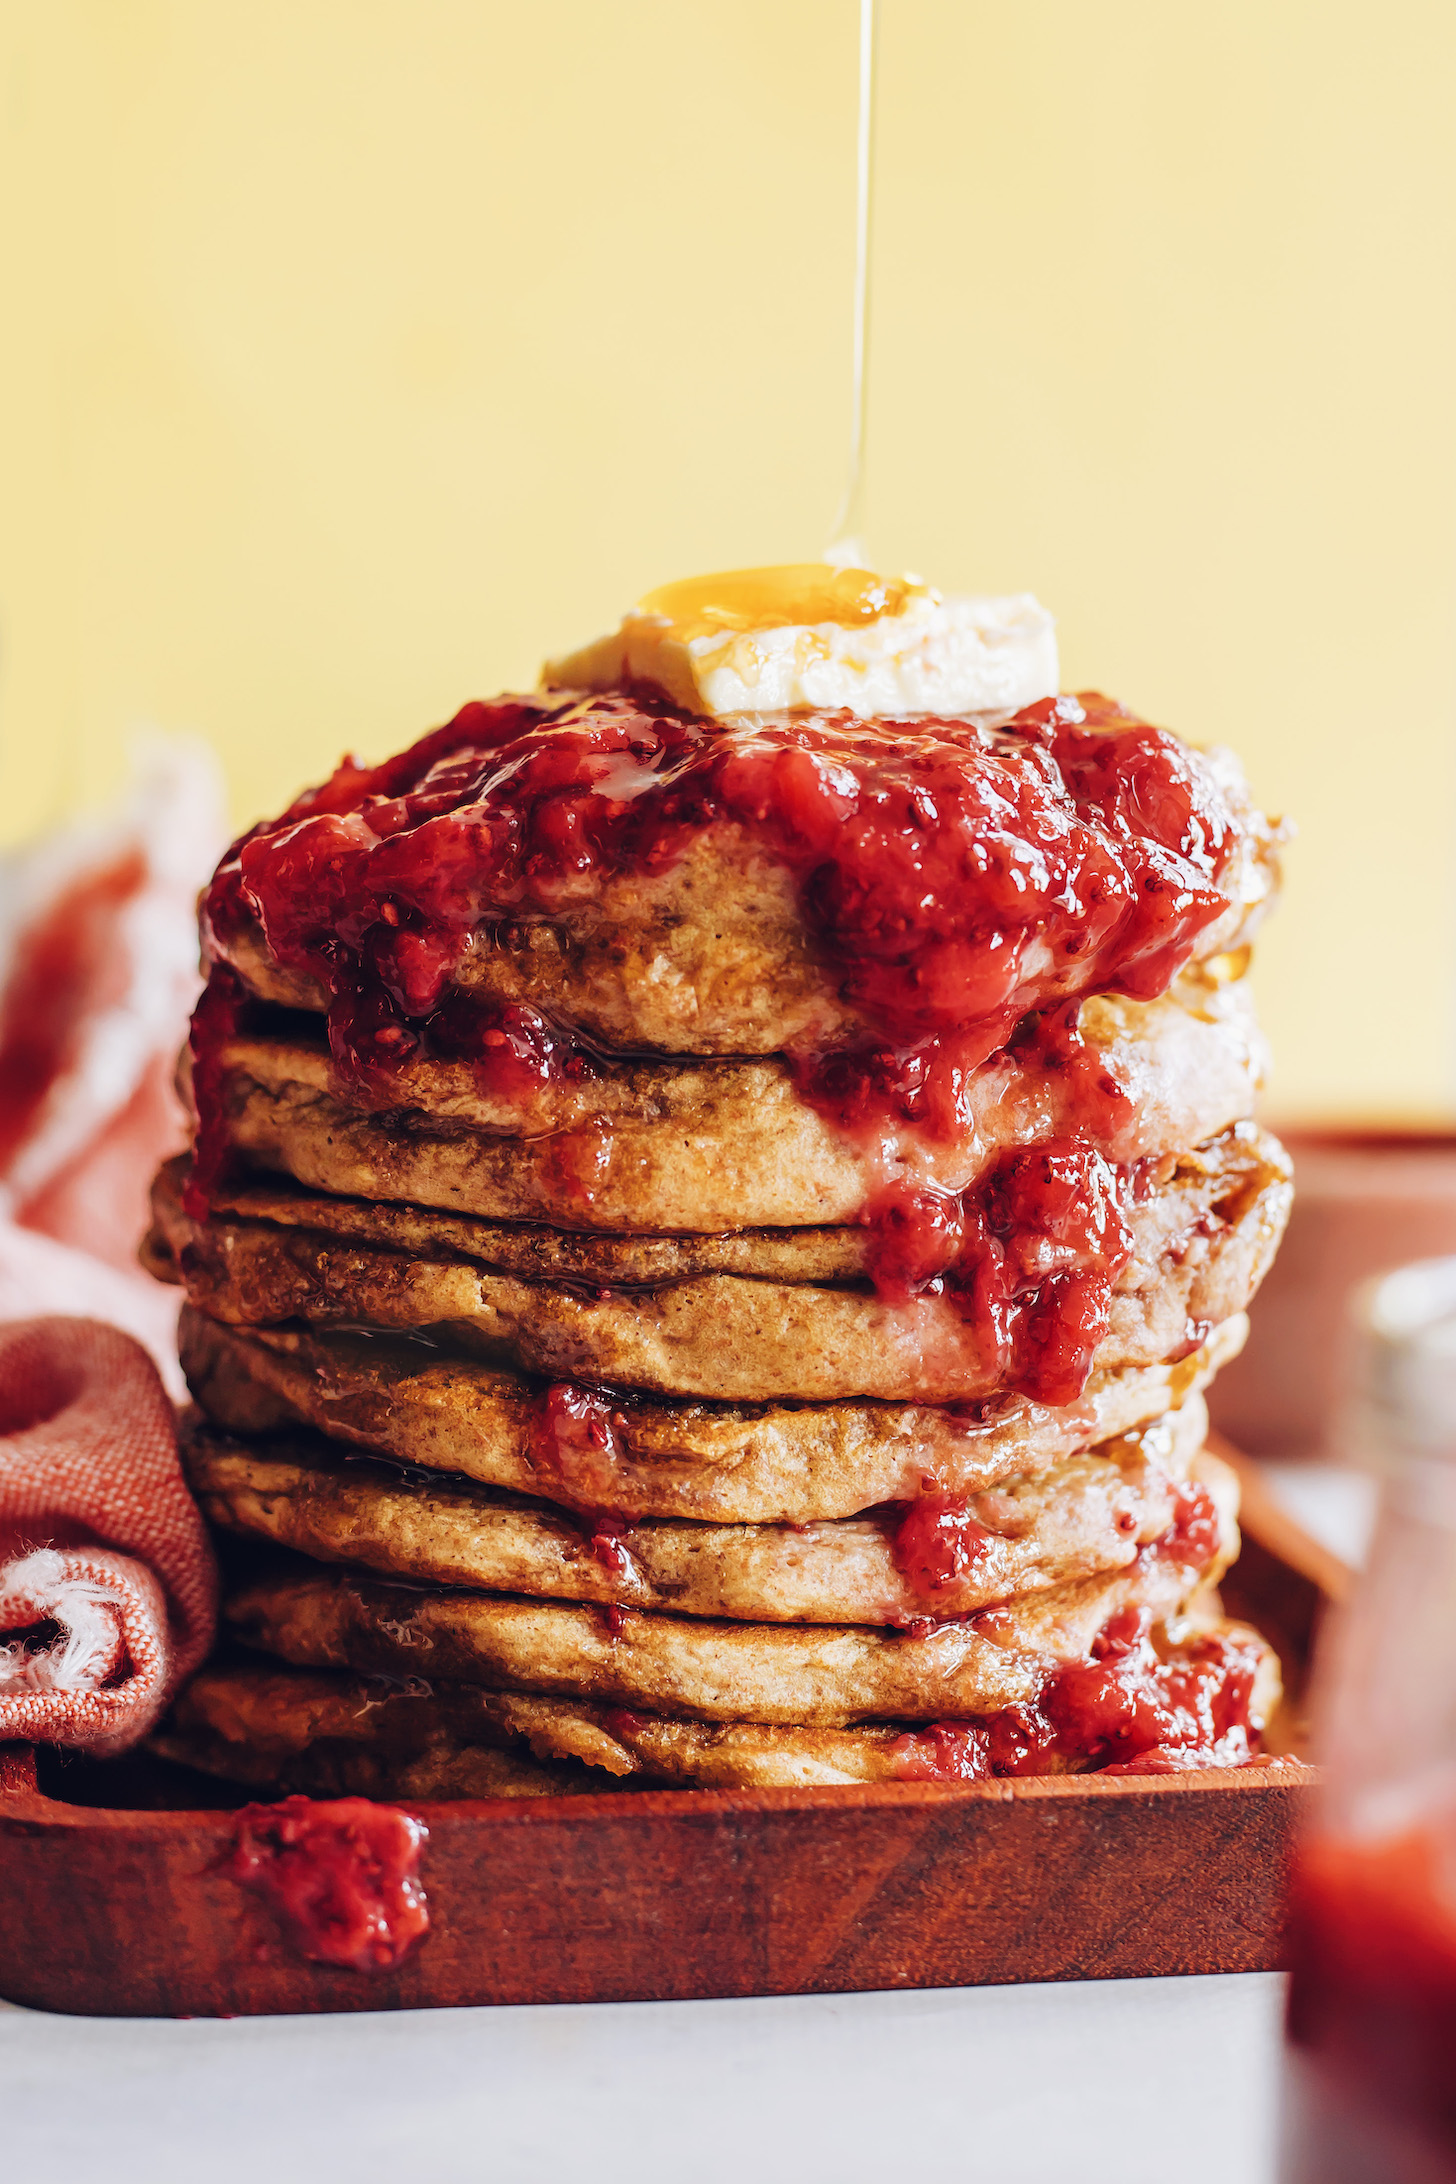 Drizzling maple syrup over a stack of whole grain pancakes with berry compote and vegan butter